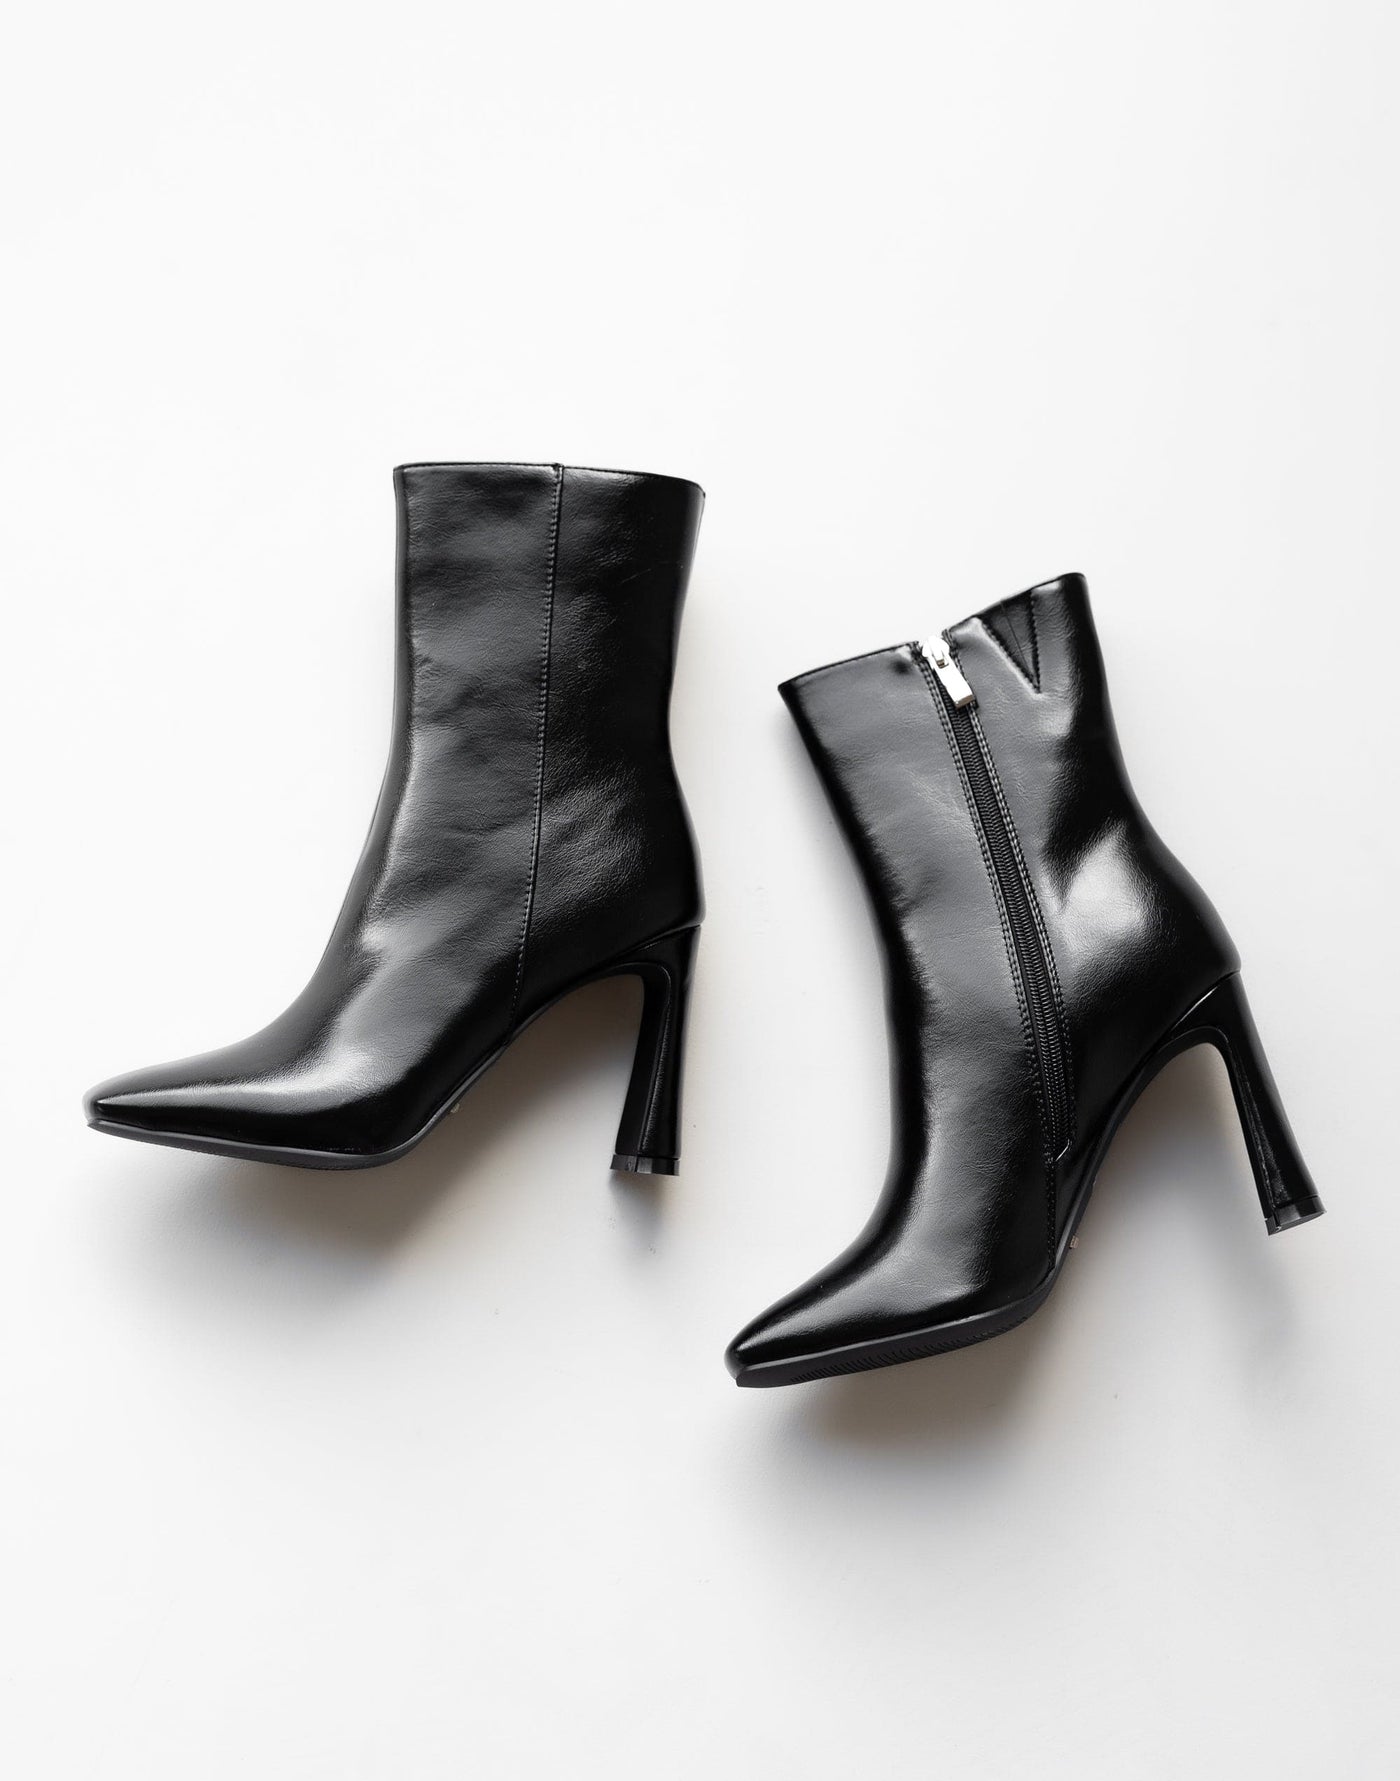 Emira Boots (Black Shimmer) - By Billini - Ankle High Block Heel Boot - Women's Shoes - Charcoal Clothing